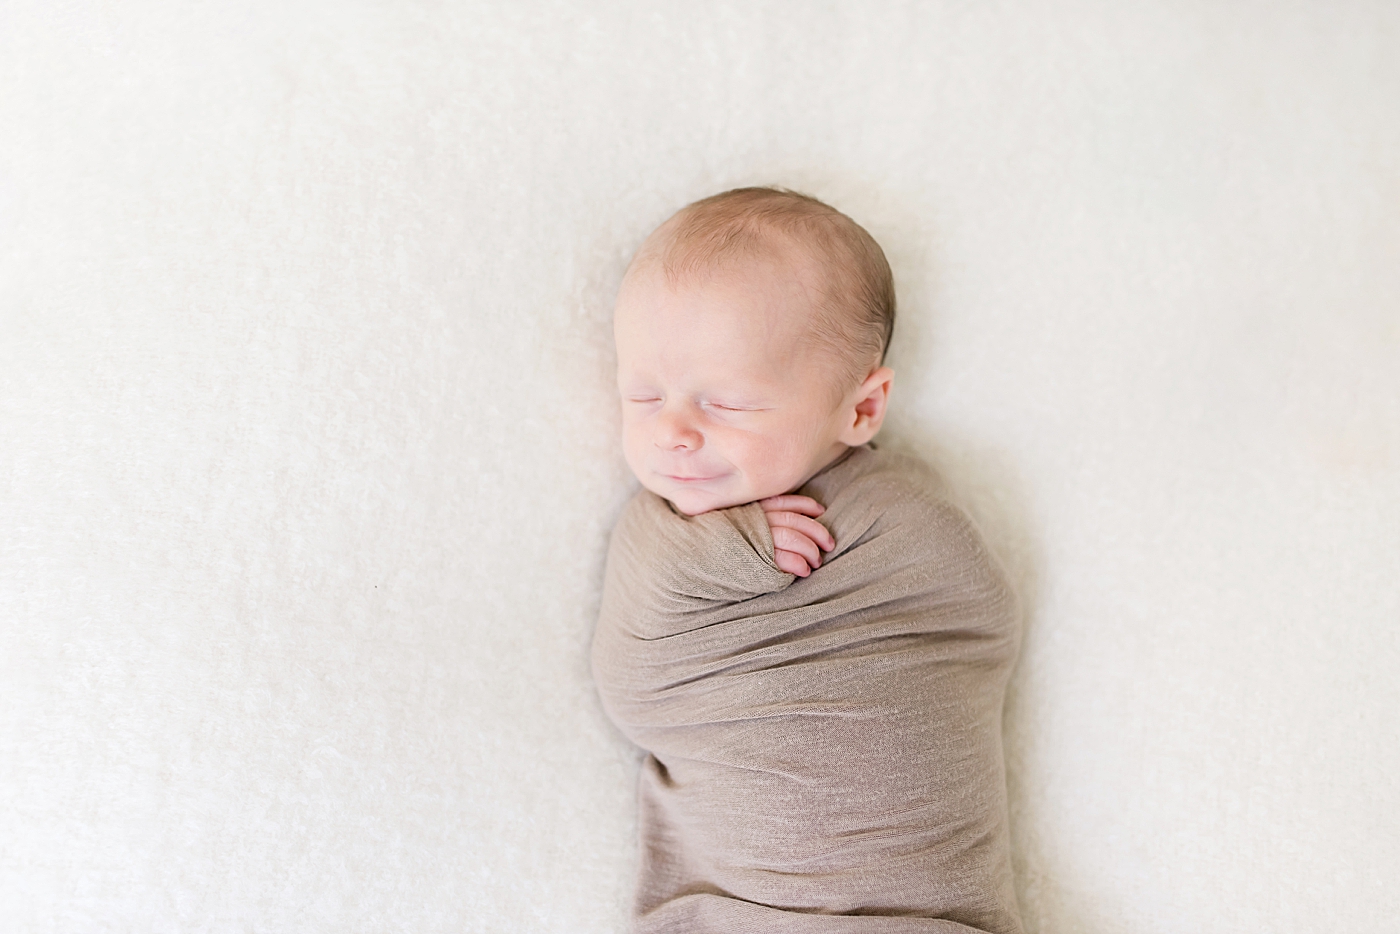 Baby boy wrapped in brown swaddle | Photo by Anna Wisjo